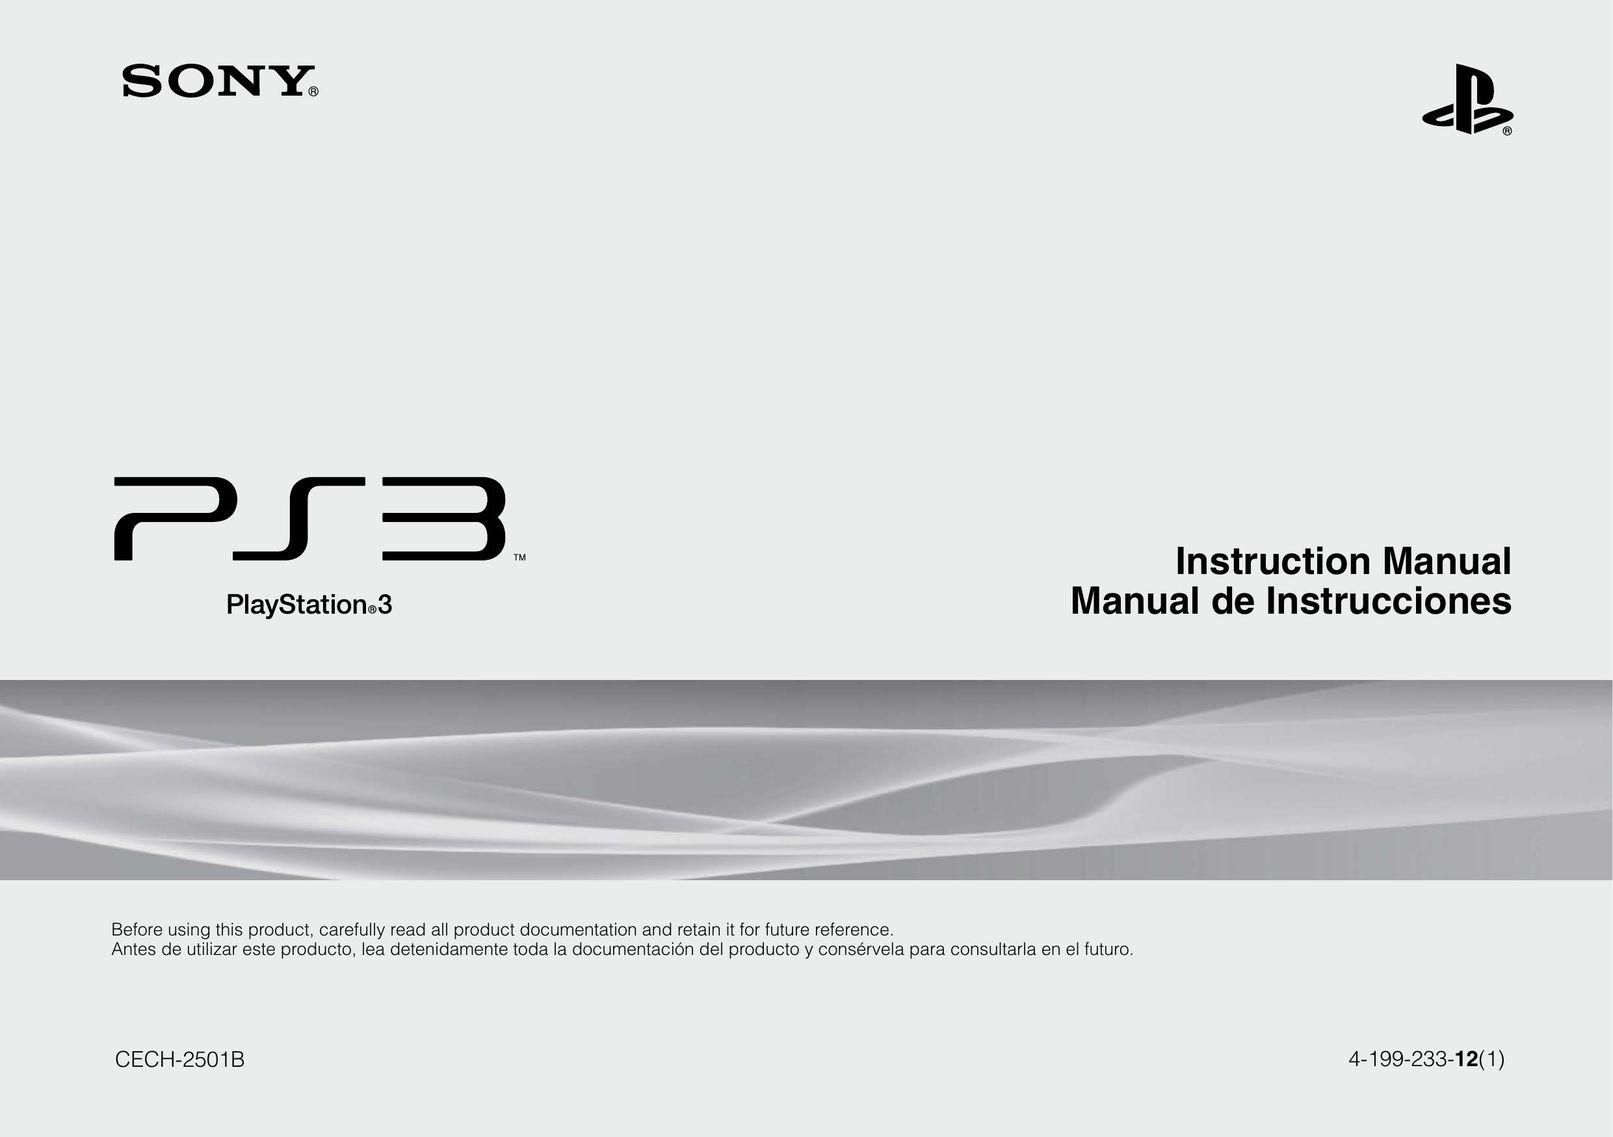 Sony 4-199-233-12 Video Game Console User Manual